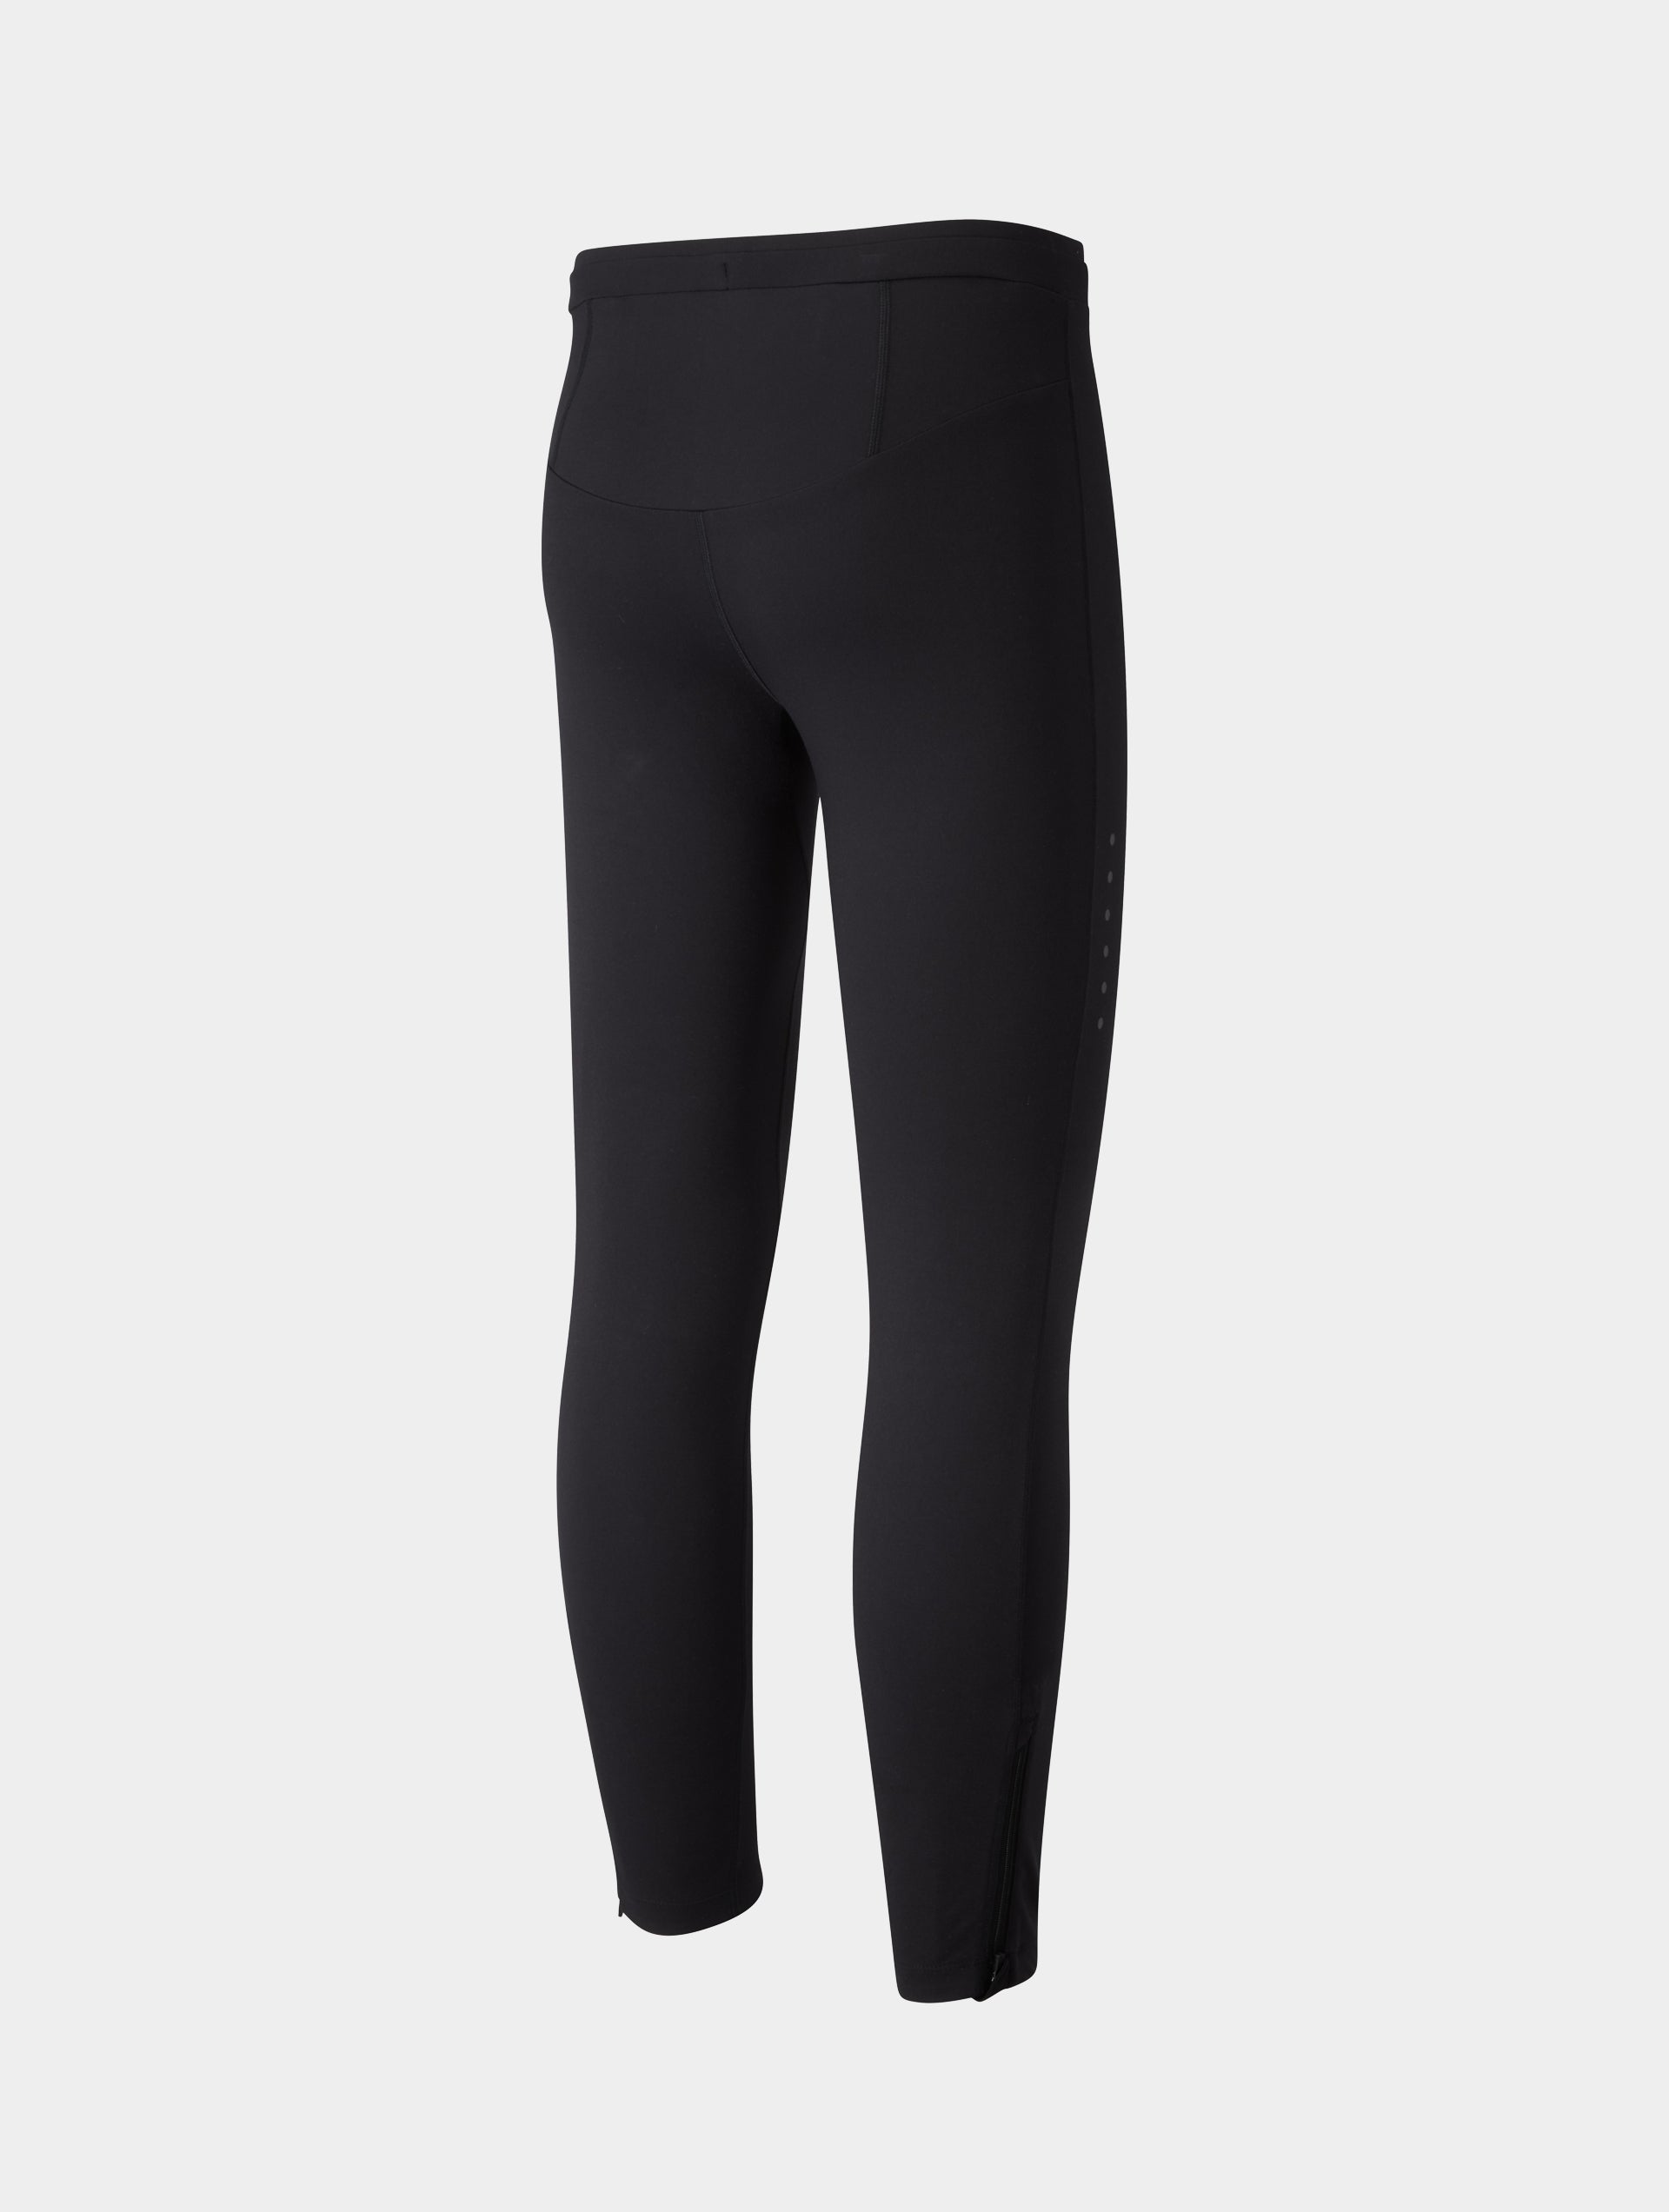 Ronhill Mens Sports leggings & tights SALE • Up to 50% discount